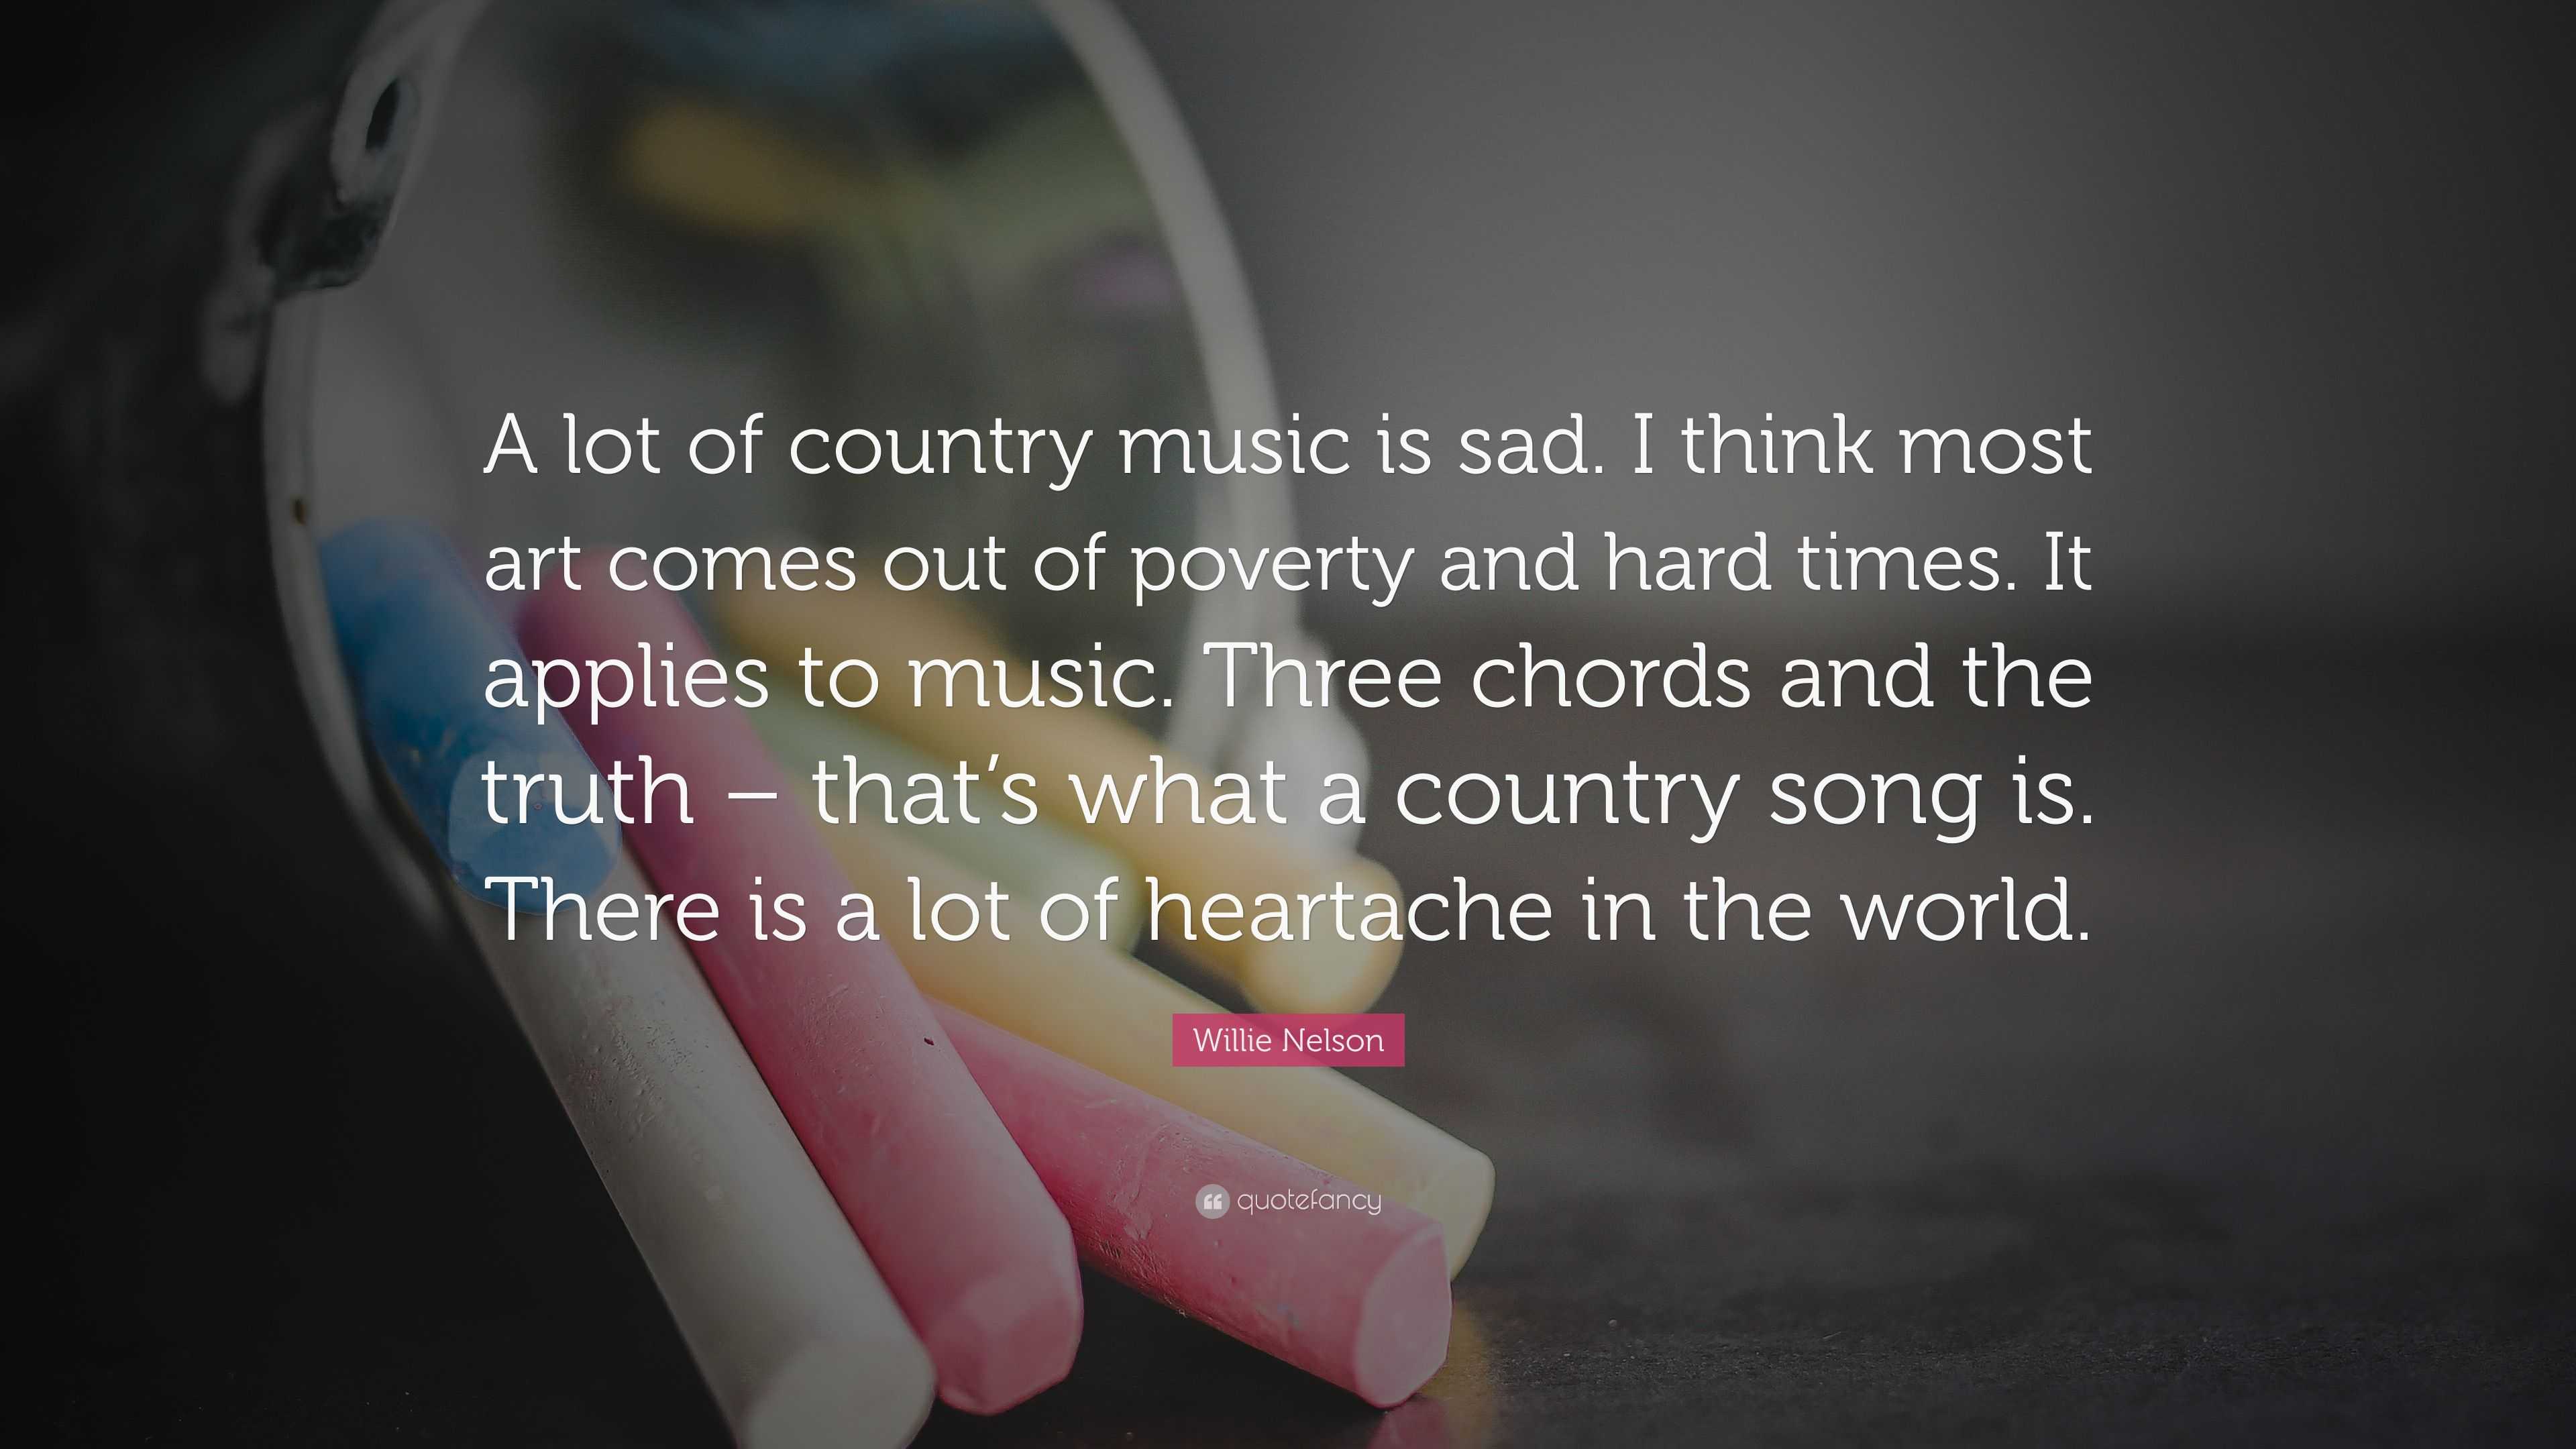 Willie Nelson Quote “A lot of country music is sad I think most